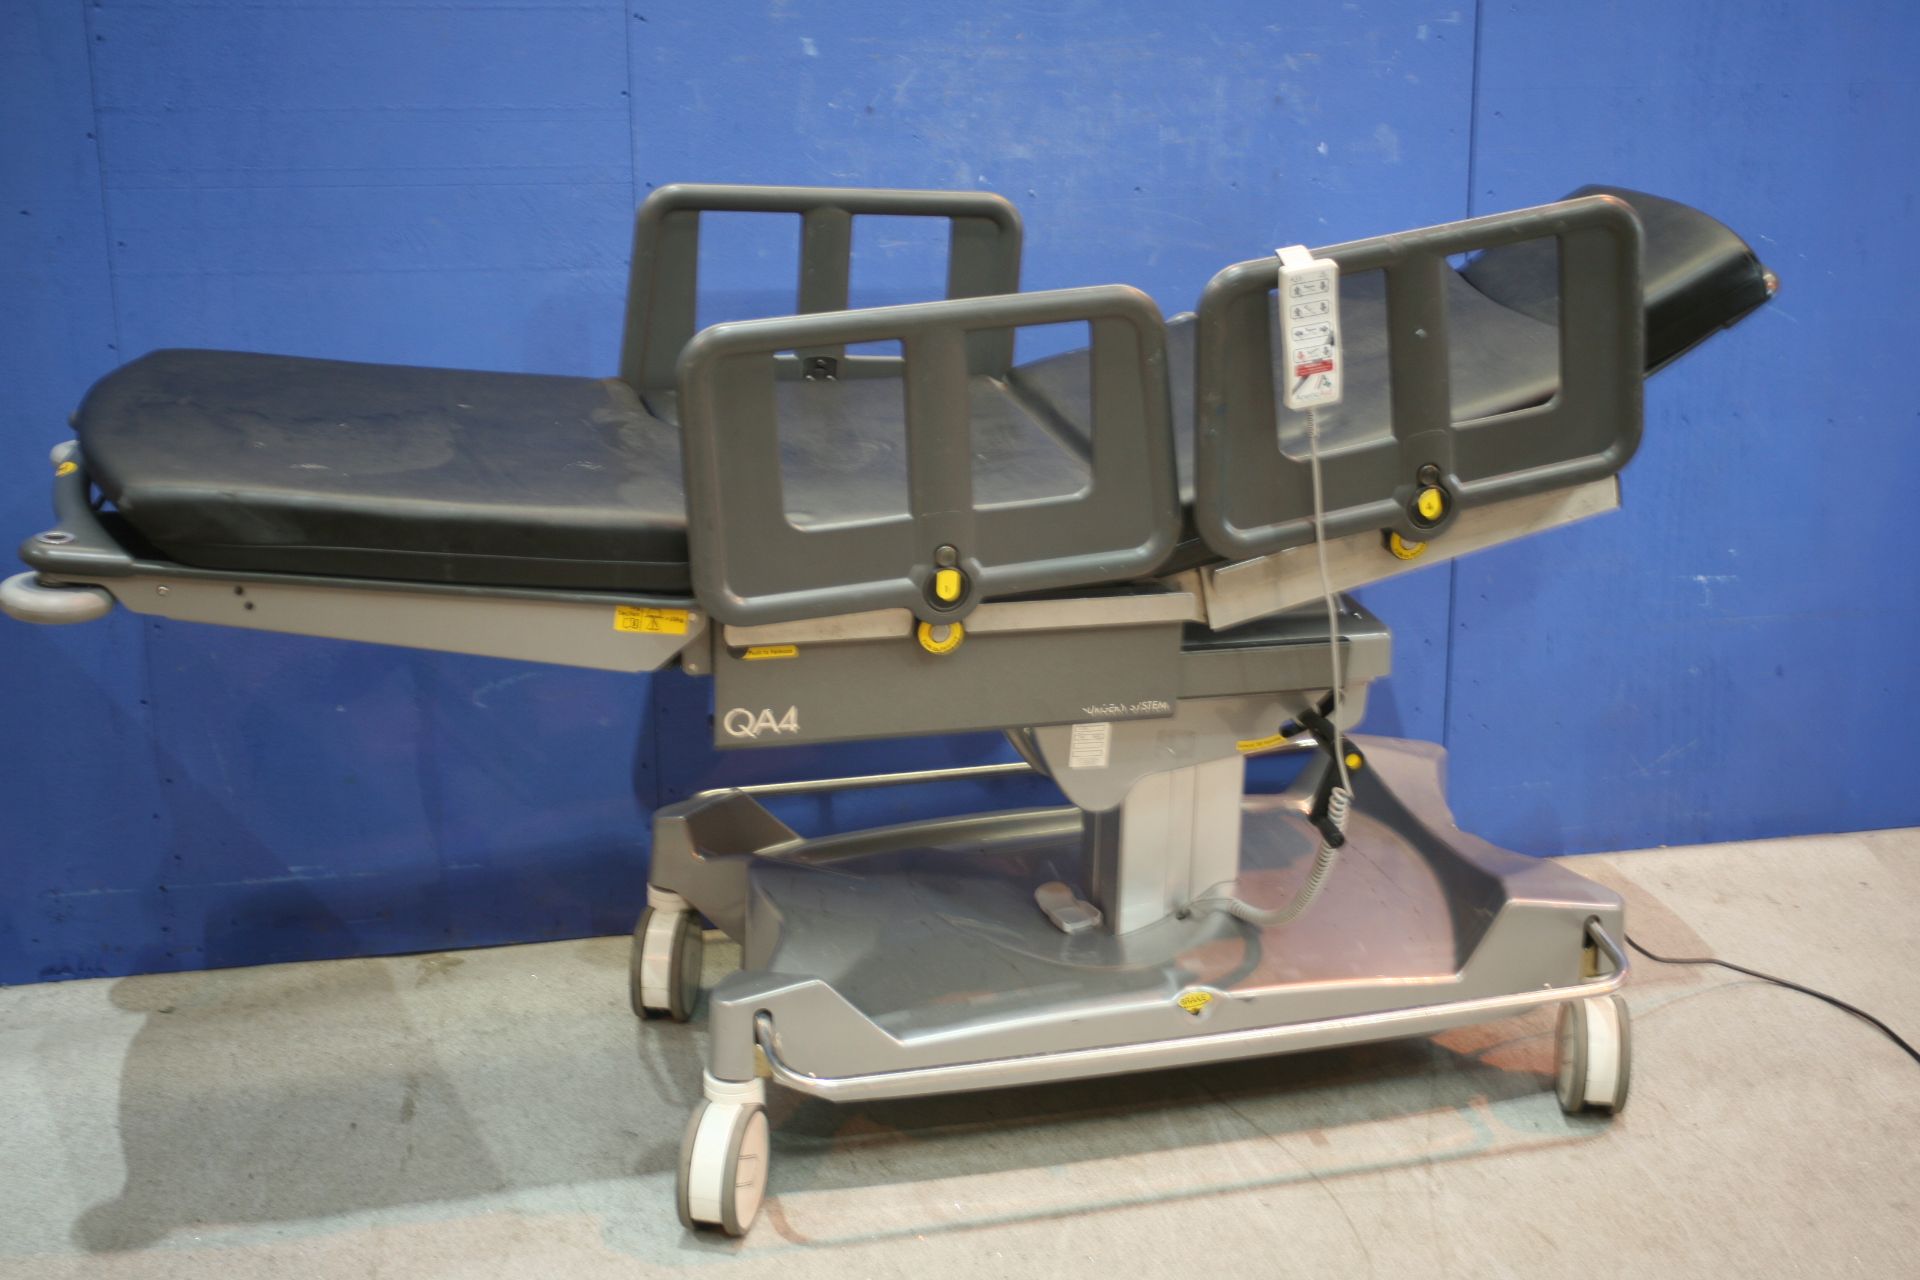 QA4 Day Surgery Trolley System - Powered *With Remote Control And Mattress* (Tested Working)